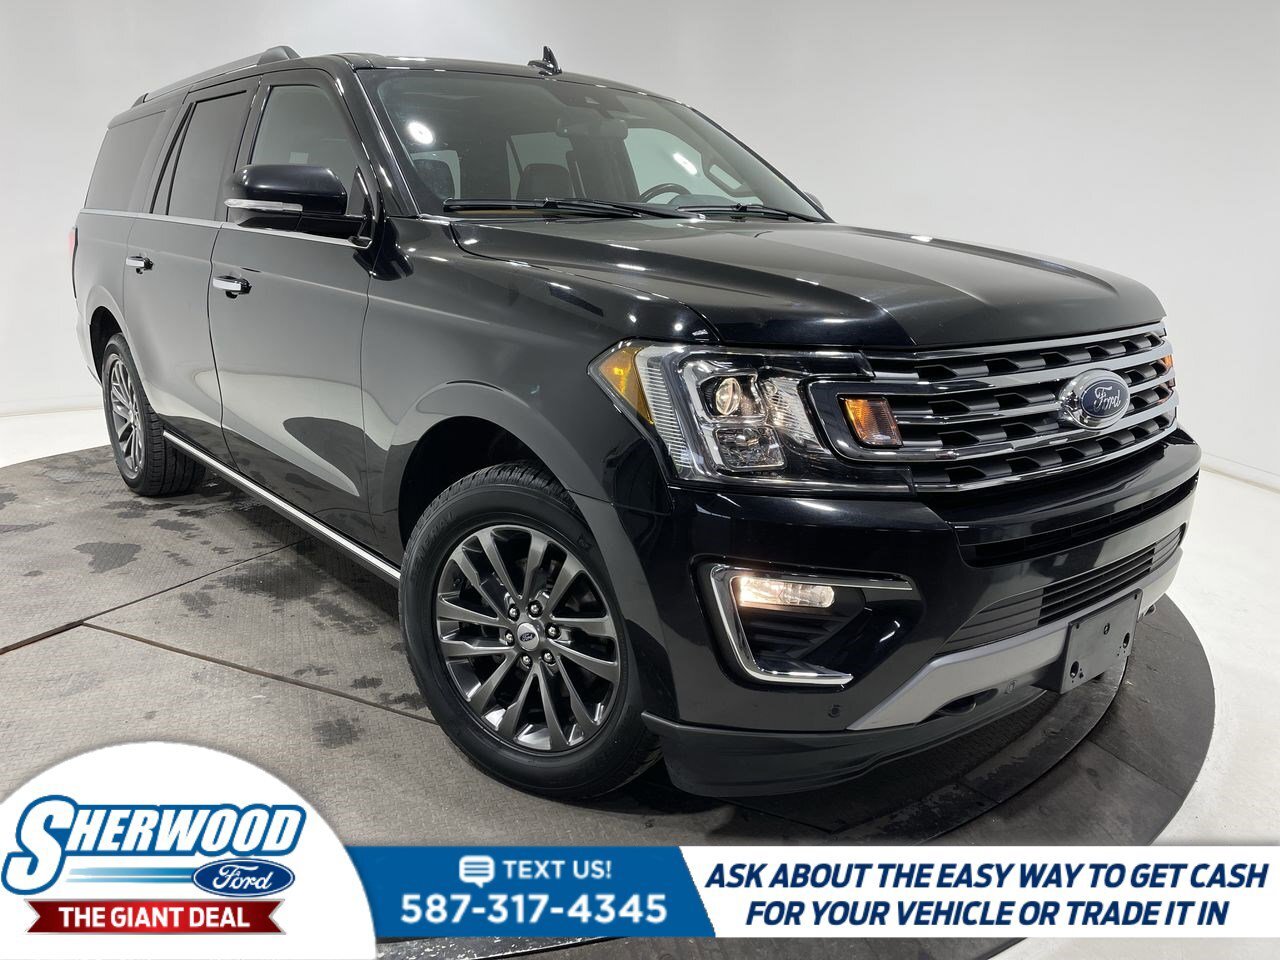 2021 Ford Expedition LTD Max- $0 Down $262 Weekly